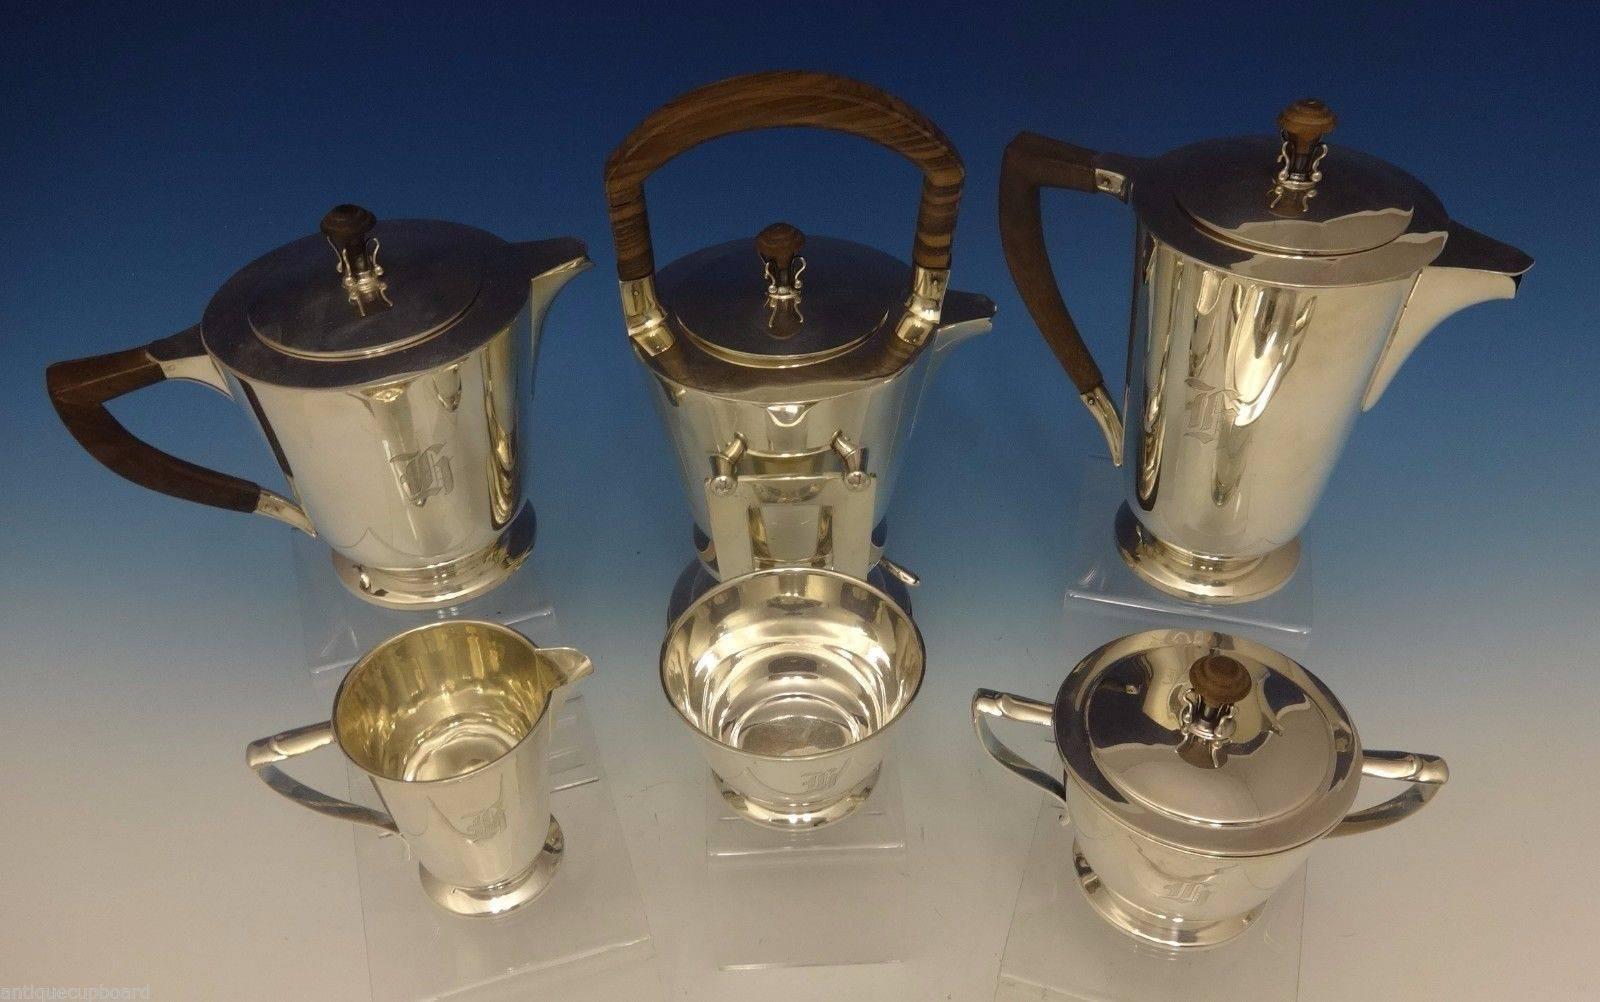 International Tea Set.

This exquisite six-piece sterling silver tea set was made by International. The pieces have teak handles and finials and the set dates from the 1950s. 
The set includes:

Kettle on stand: Holds 2 pints, it's marked with